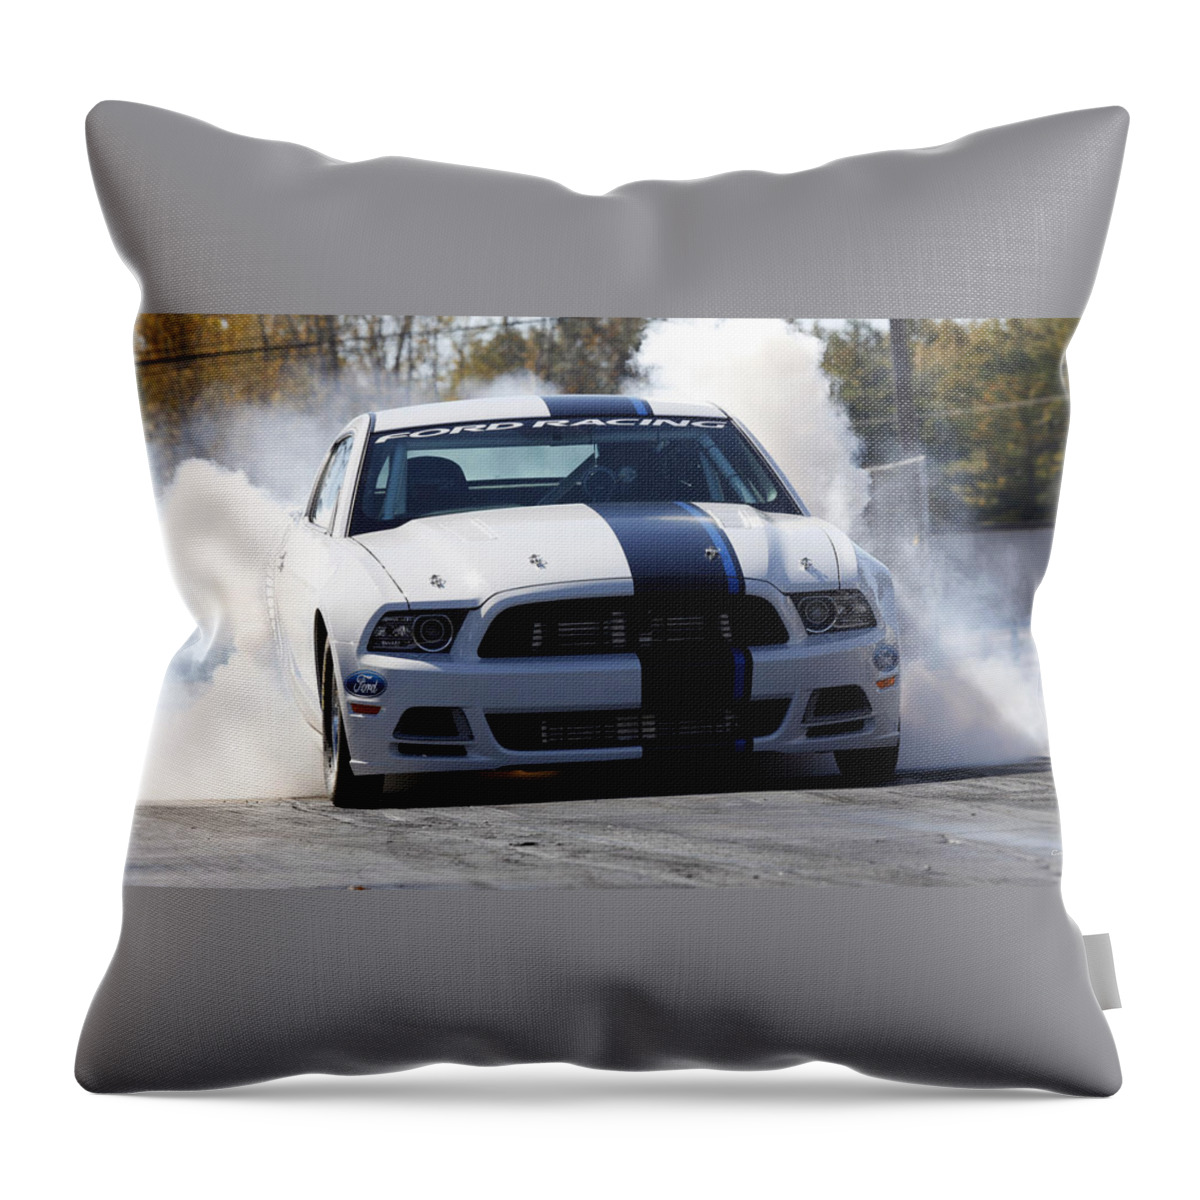 Ford Mustang Cobra Jet Twin-turbo Throw Pillow featuring the photograph Ford Mustang Cobra Jet Twin-turbo by Jackie Russo